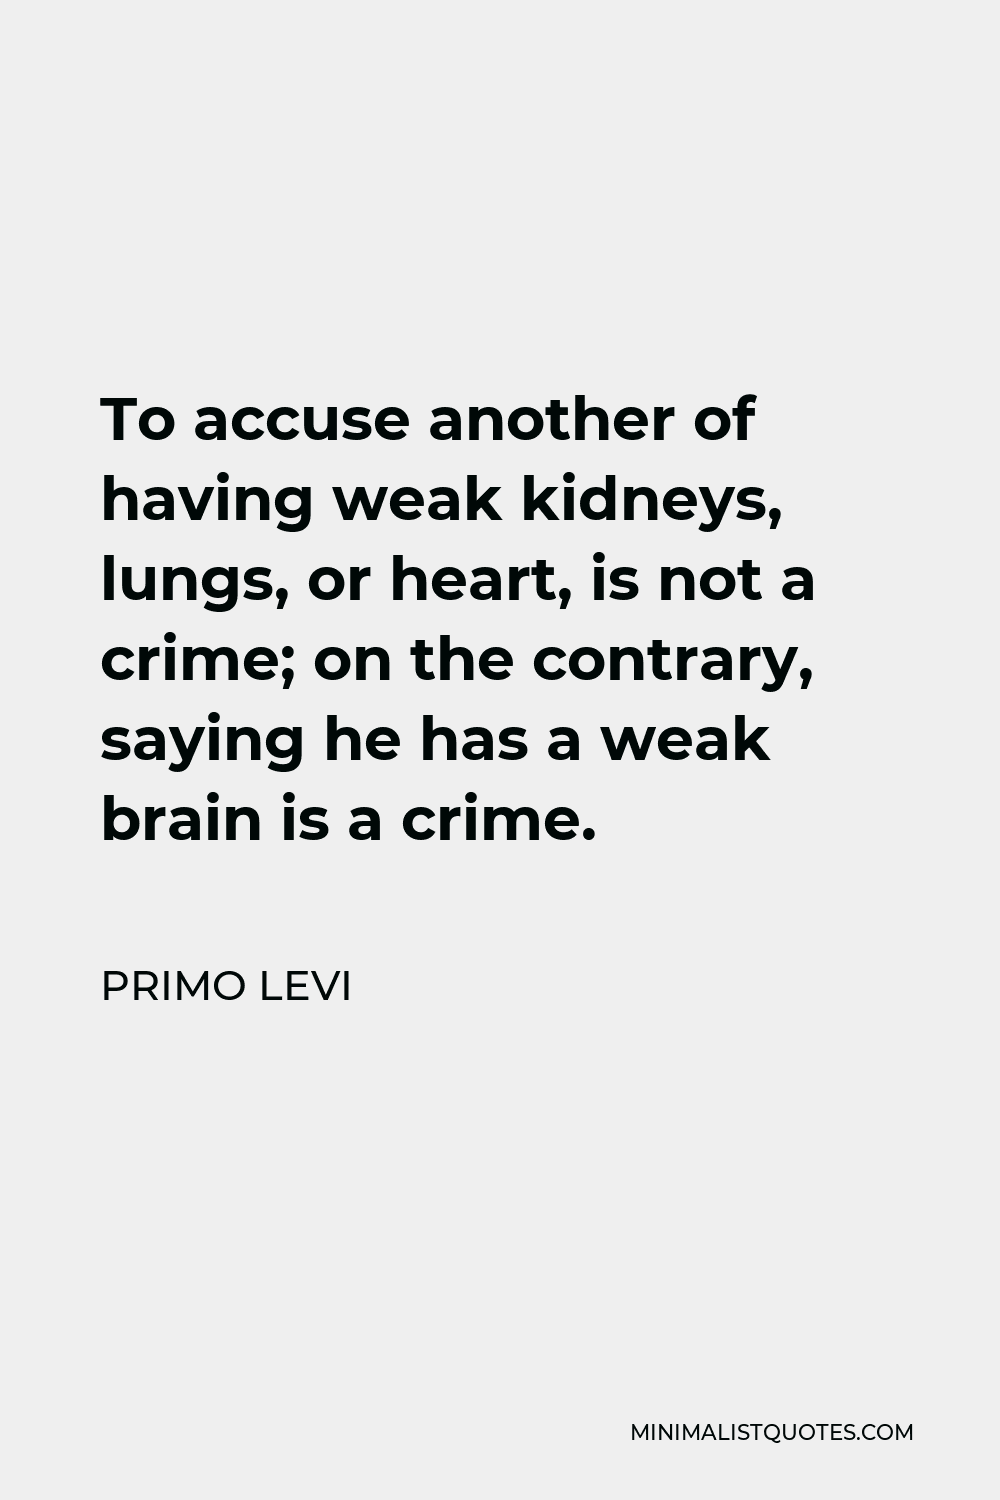 Primo Levi Quote - To accuse another of having weak kidneys, lungs, or heart, is not a crime; on the contrary, saying he has a weak brain is a crime.